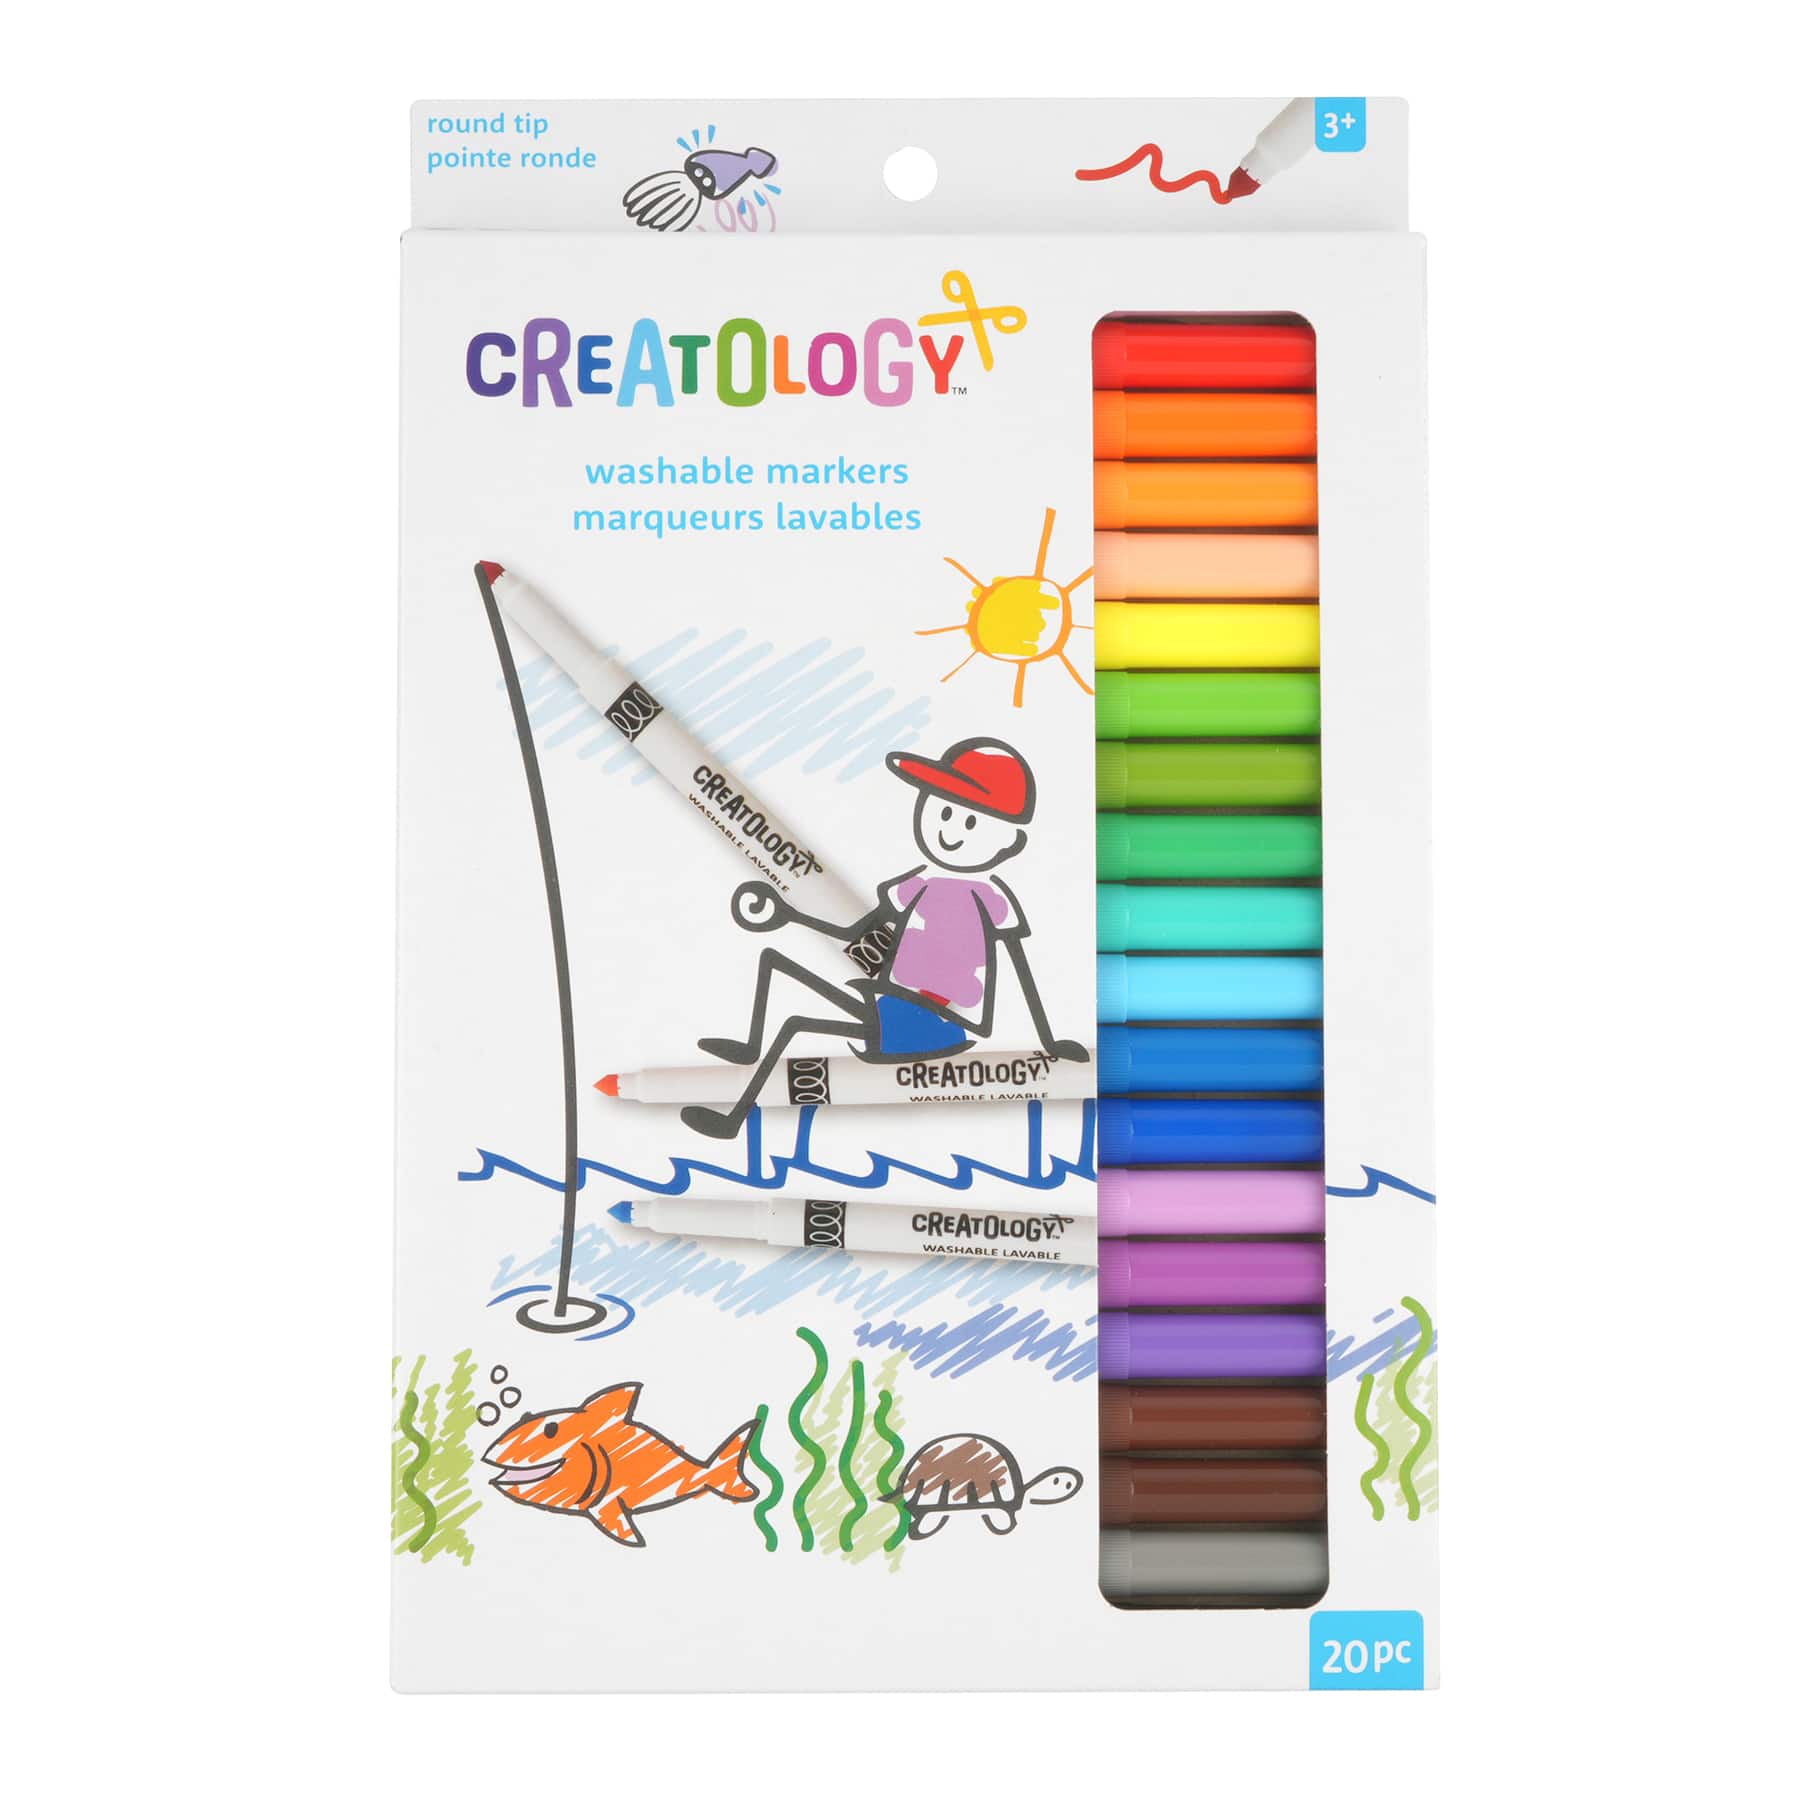 12 Packs: 20 ct. (240 total) Round Tip Washable Marker Set by Creatology&#xAE;